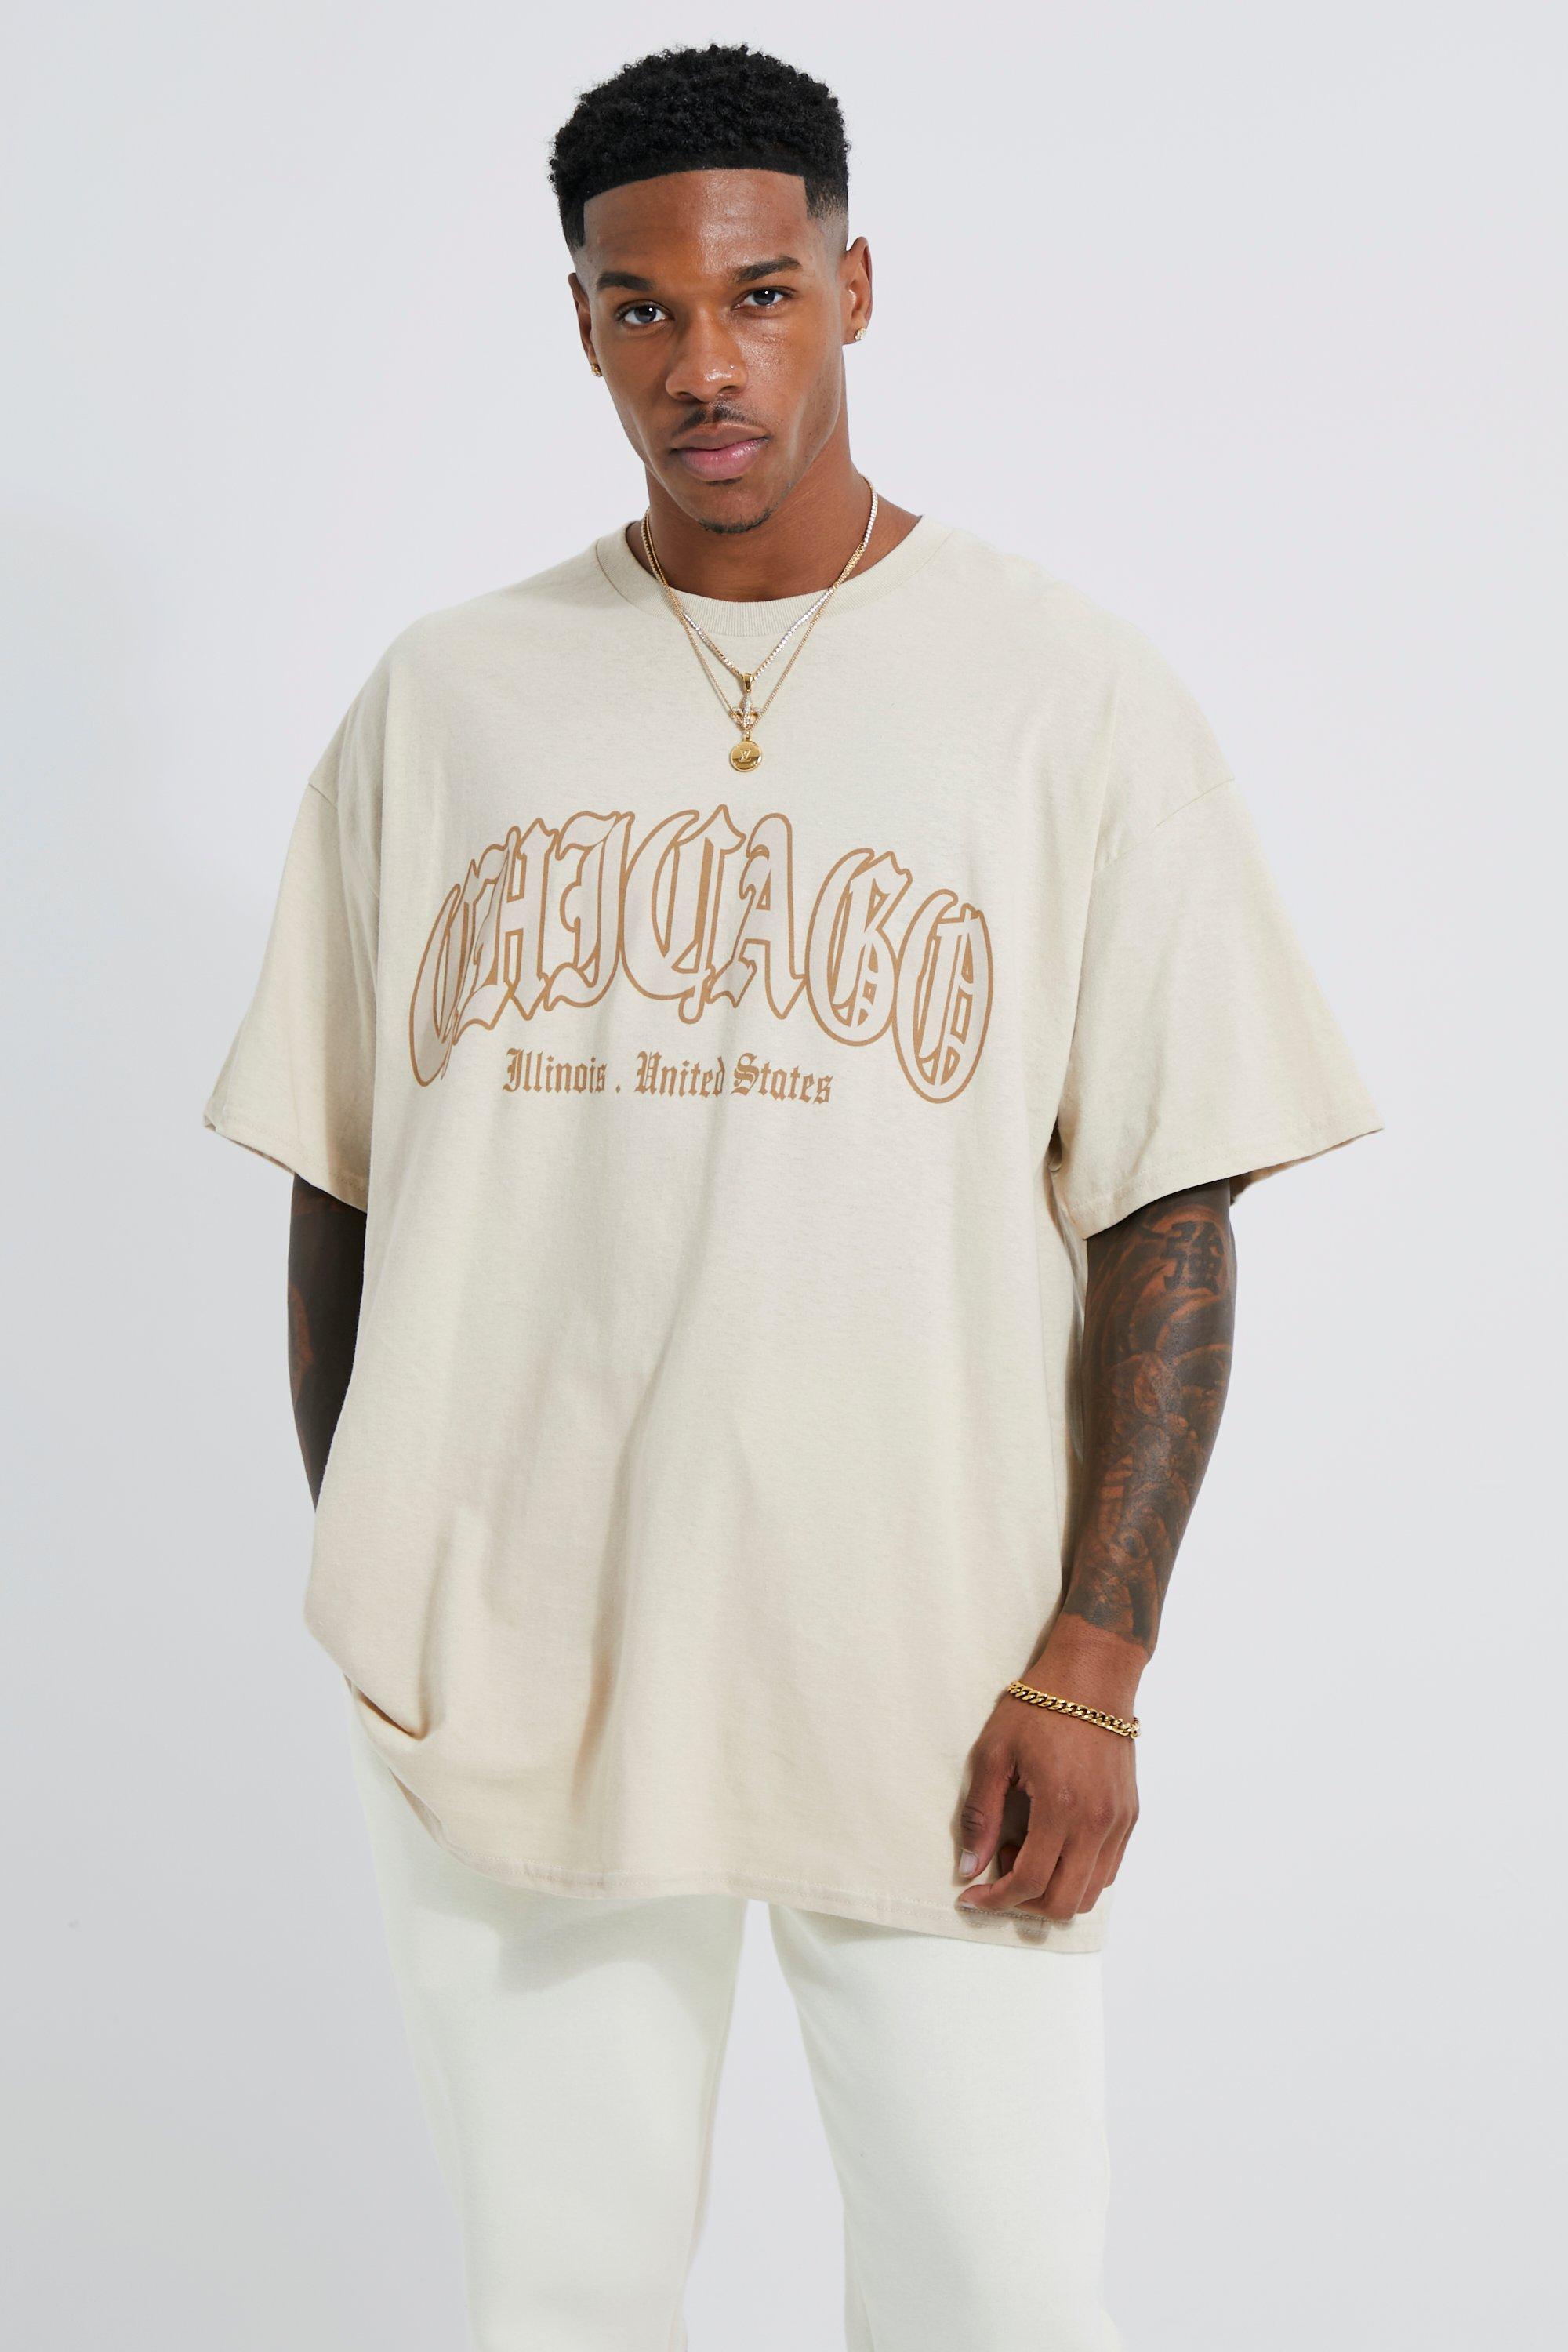 boohooMAN Oversized Chicago Print T-Shirt - Beige - Size XS